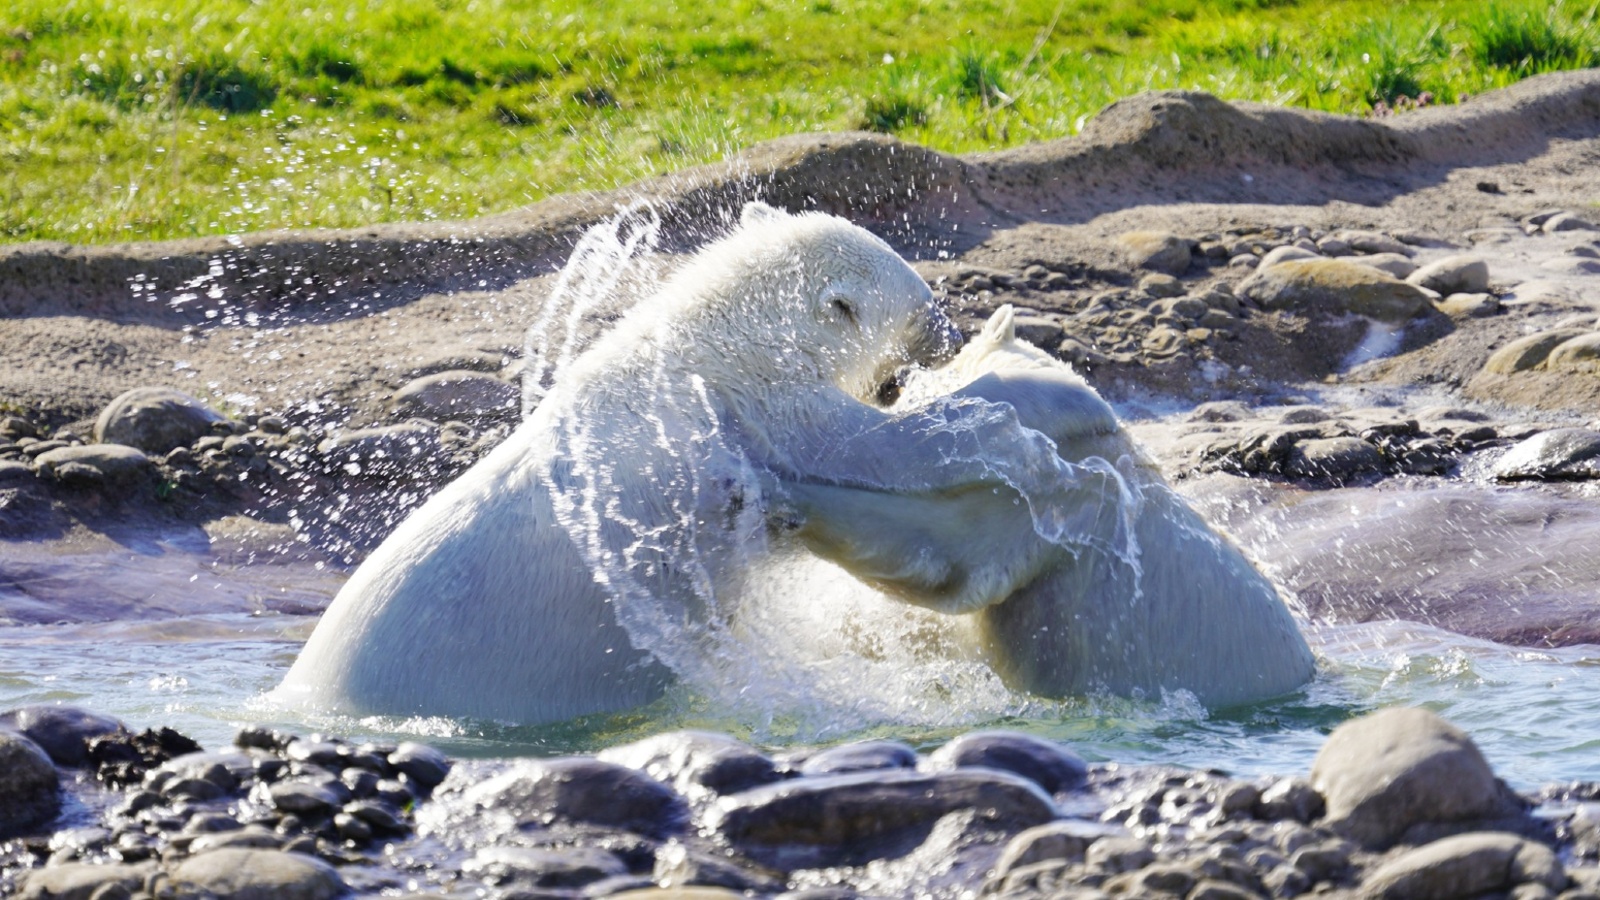 The bears play fight in water